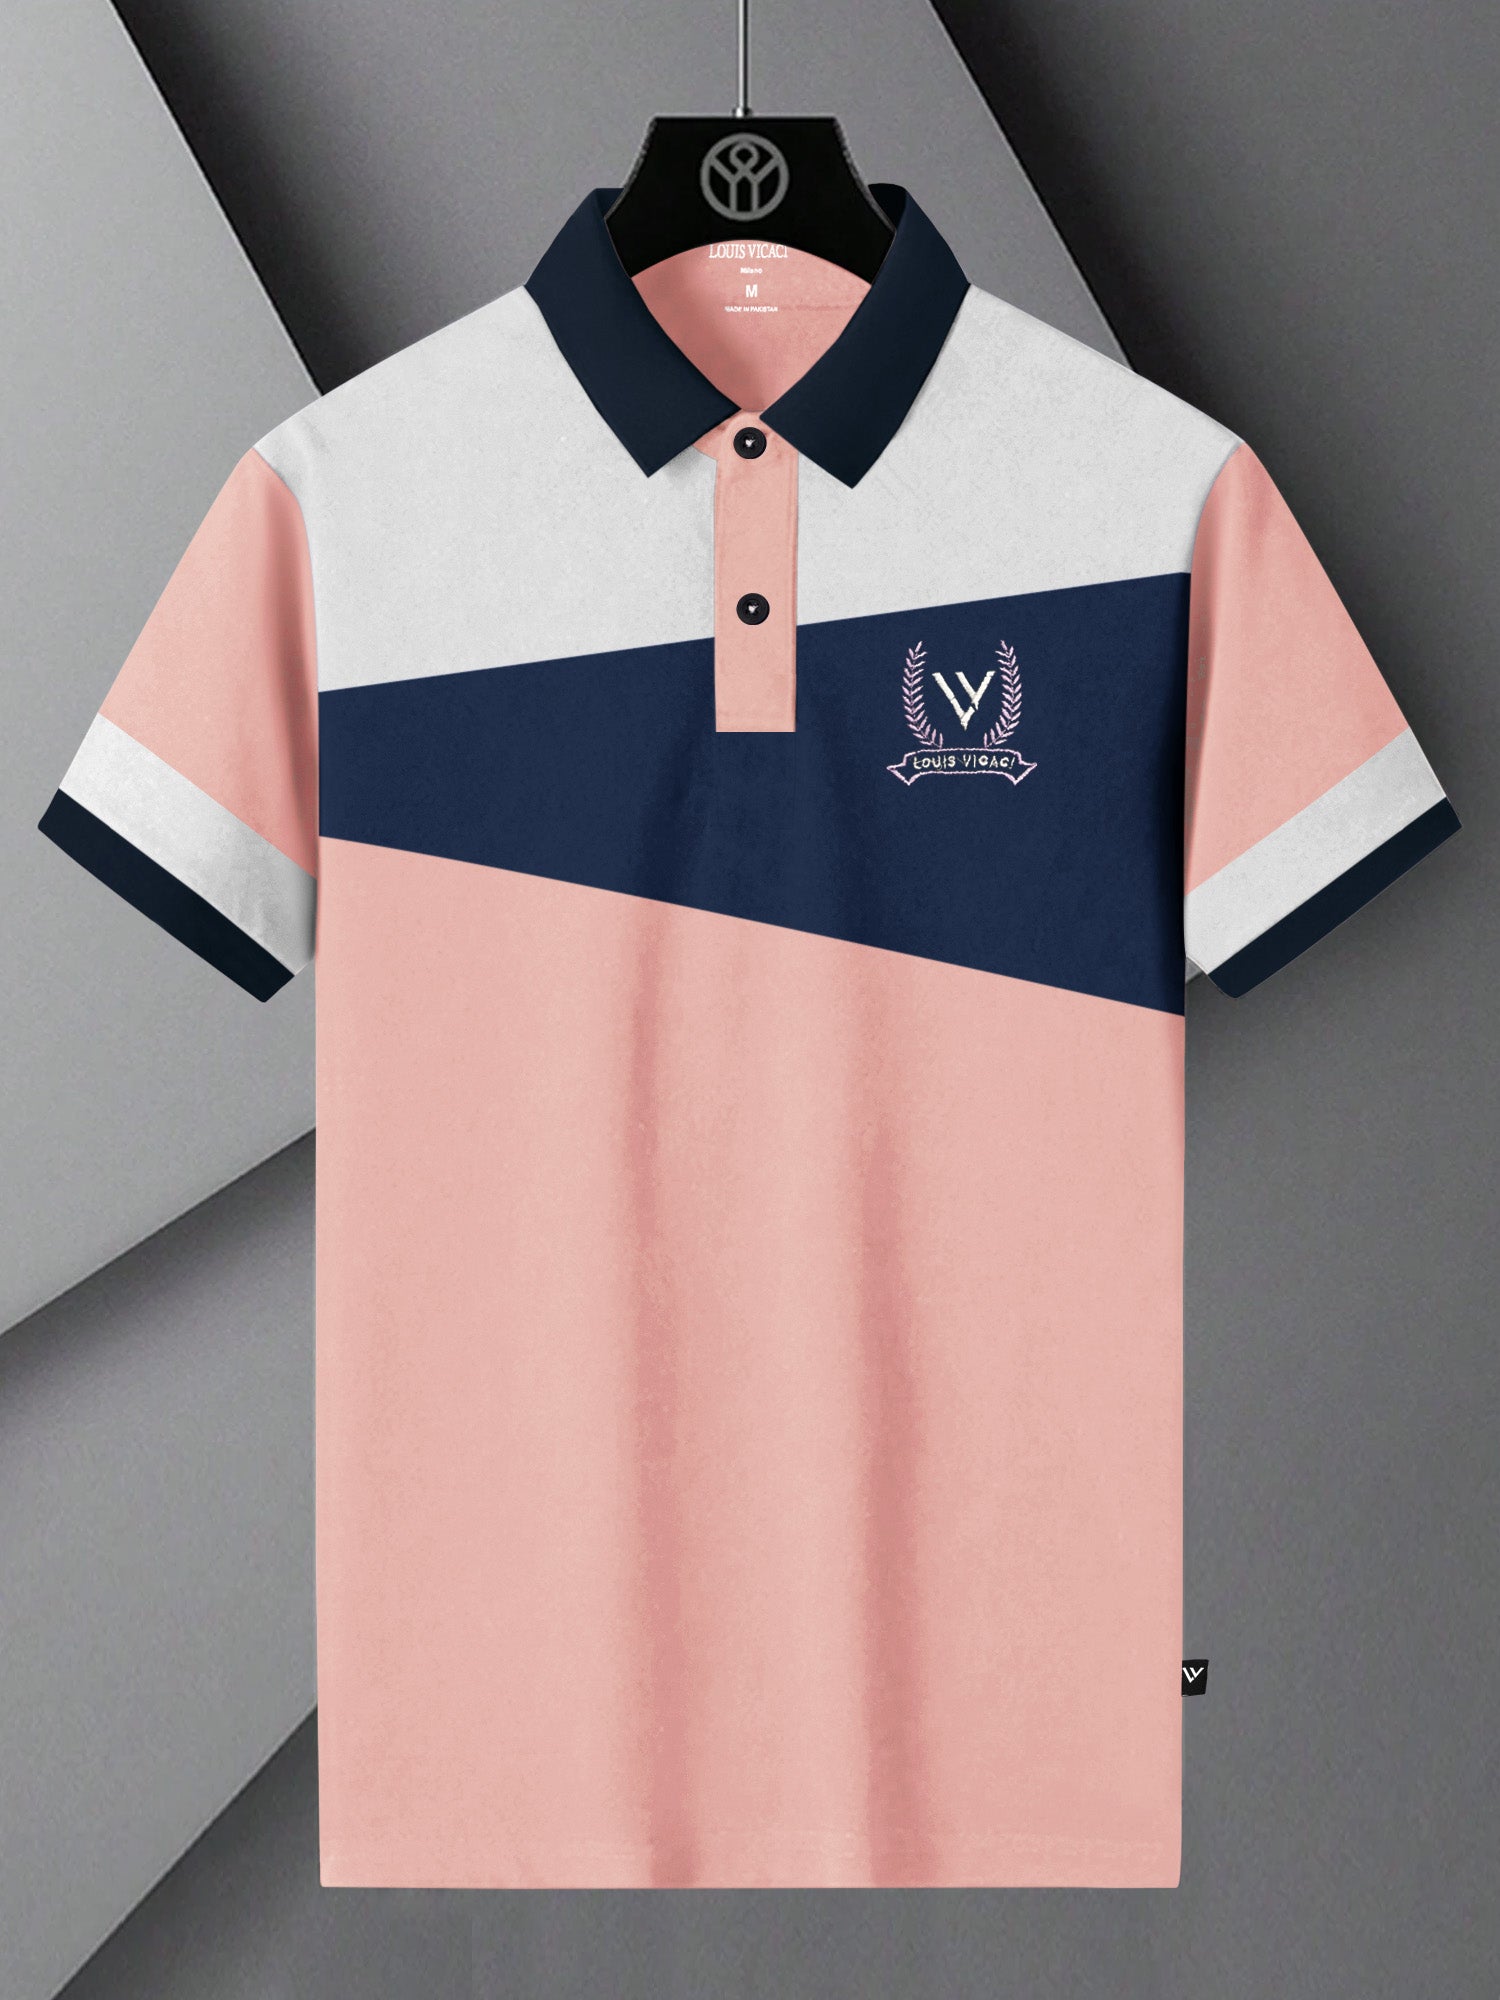 LV Summer Polo Shirt For Men-Peach with Navy & White Panel-BE833